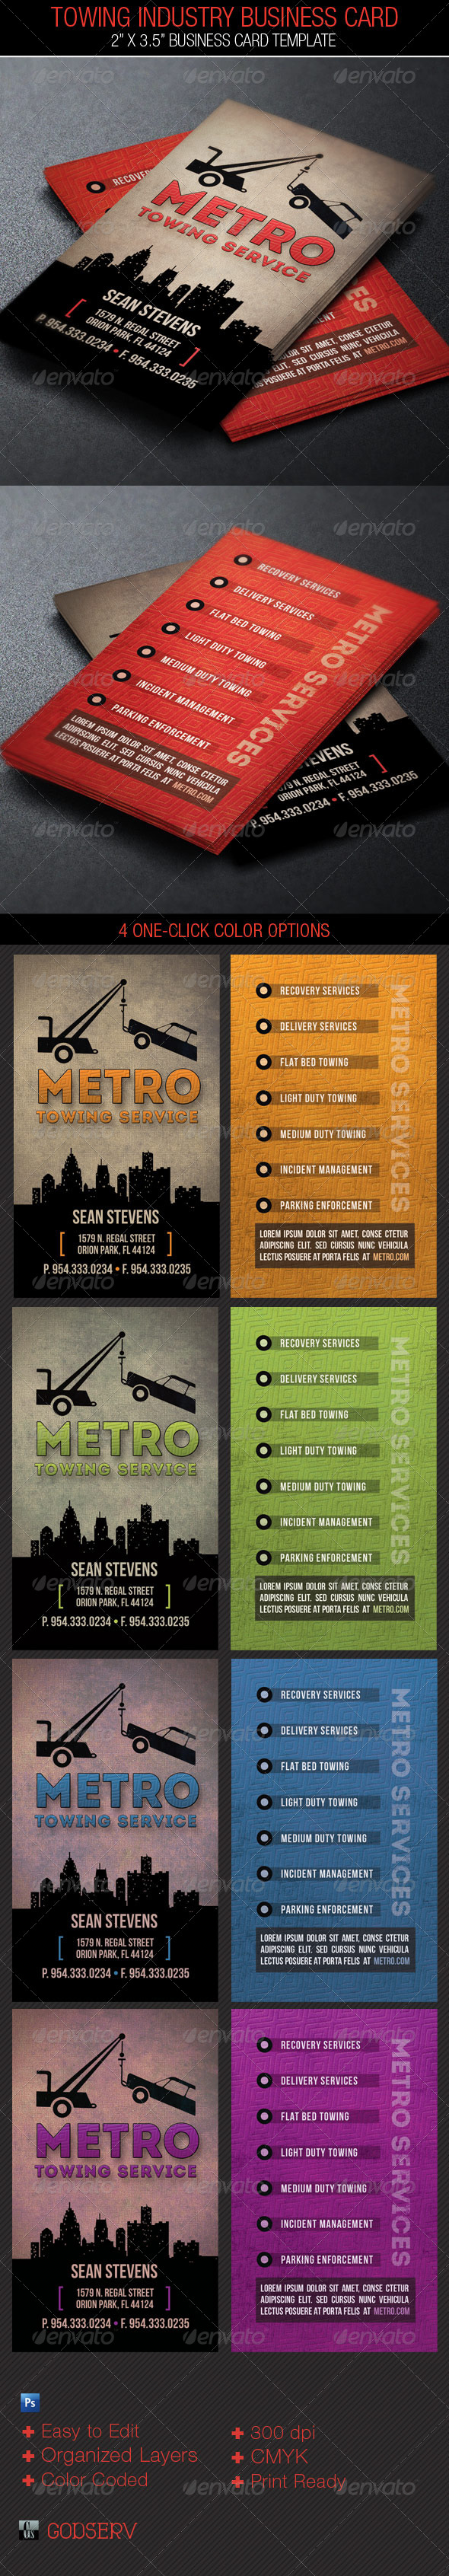 Towing Industry Business Card Template